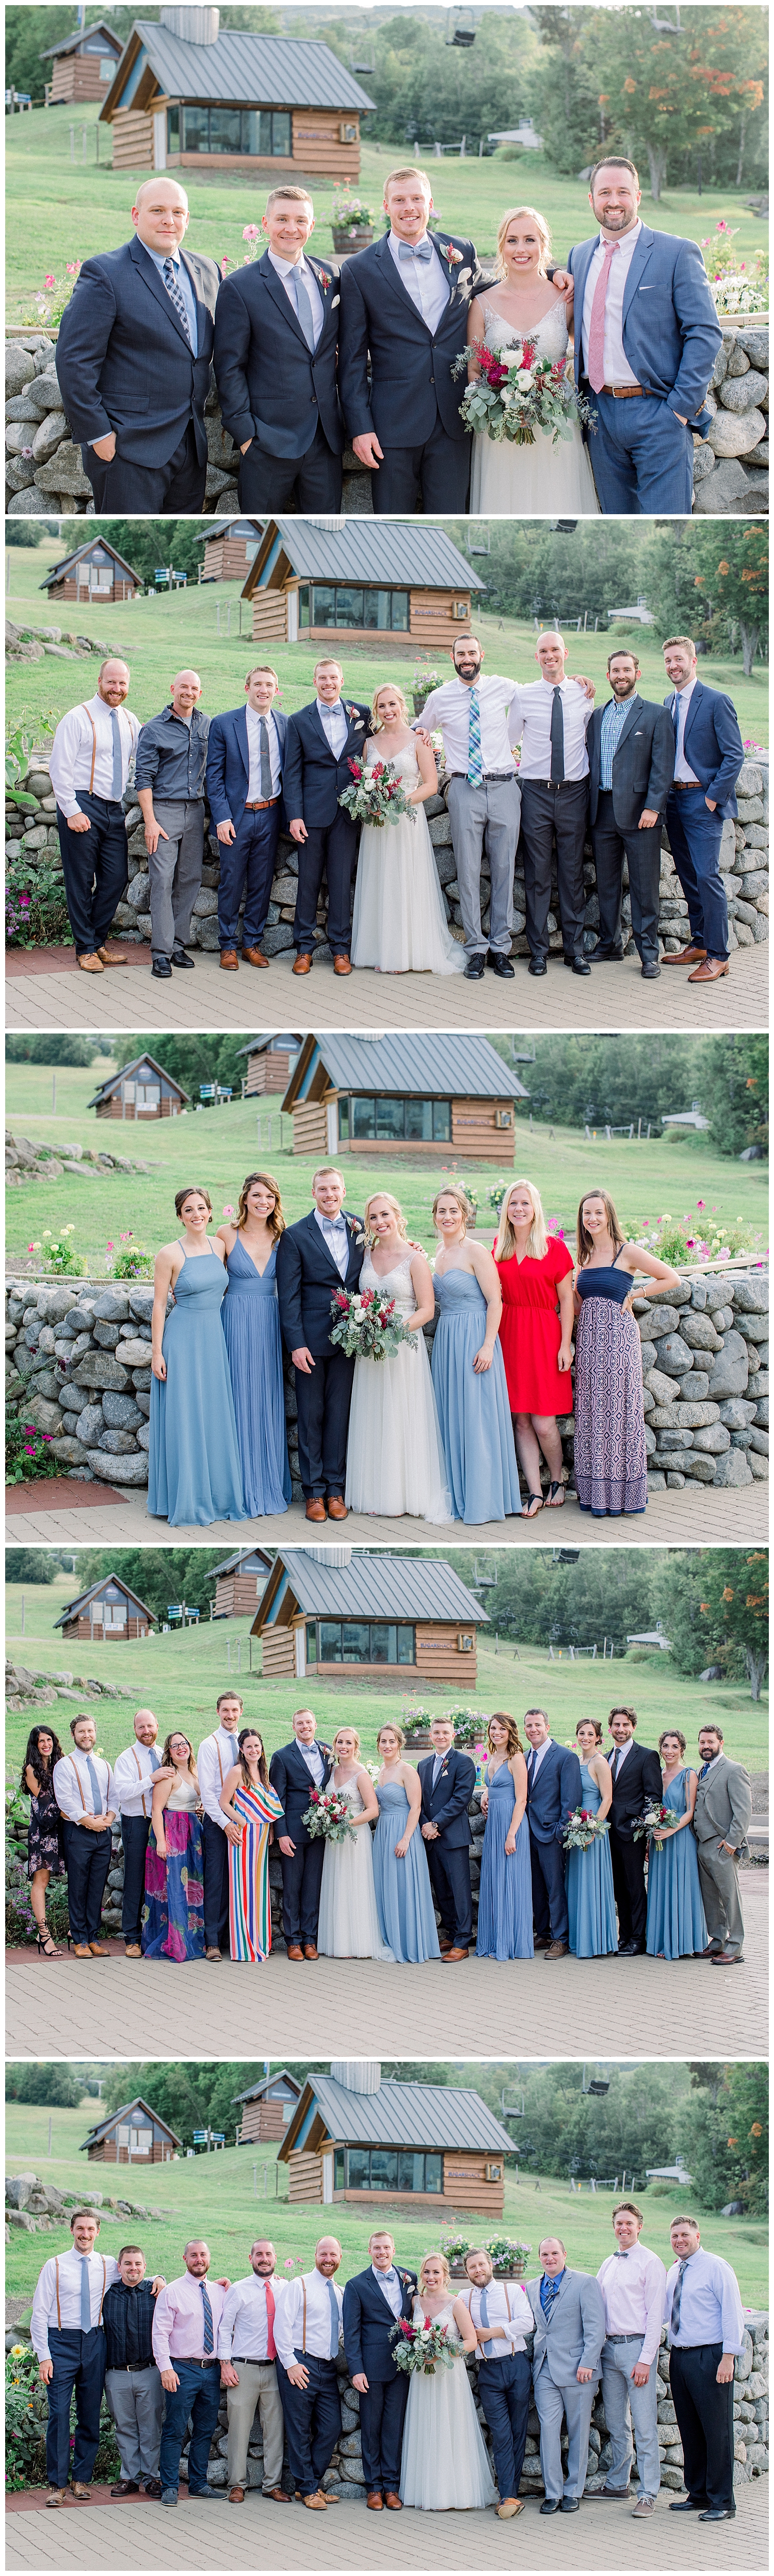 Friend group photos at Sugarloaf Mountain Resort Wedding in Maine, photos by Halie Olszowy.